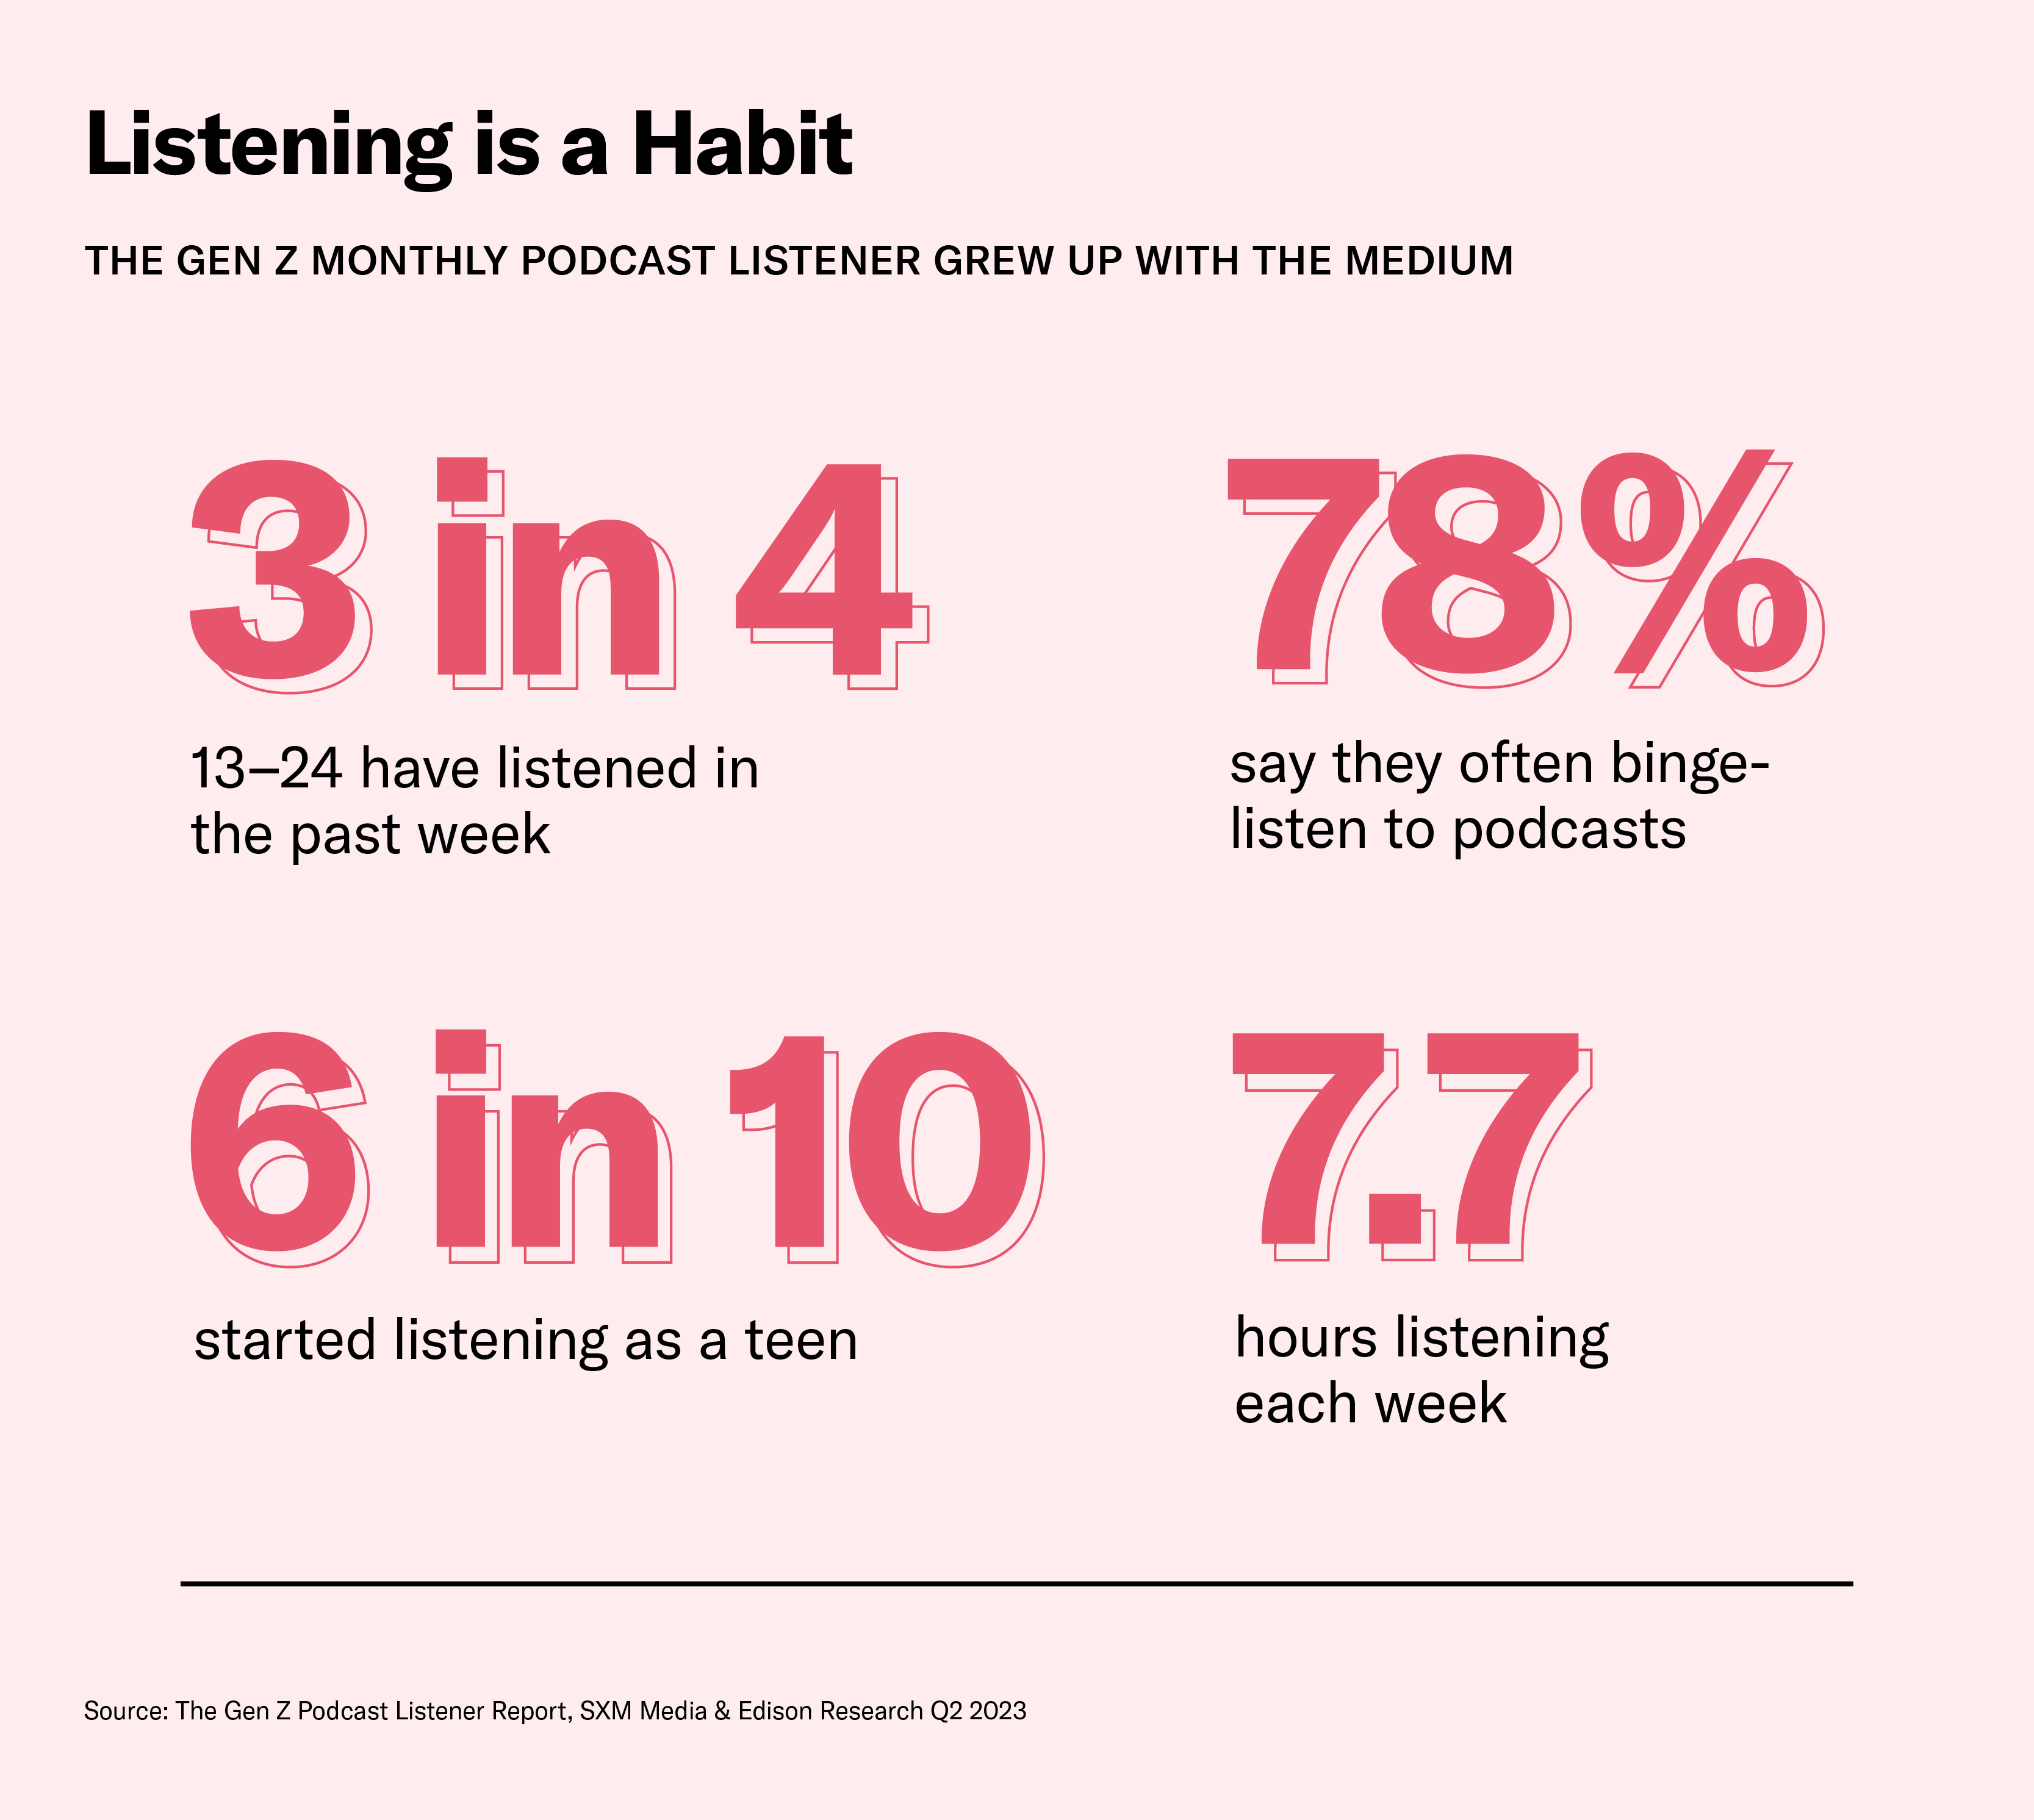 Listening to podcasts is a habit for Gen Z